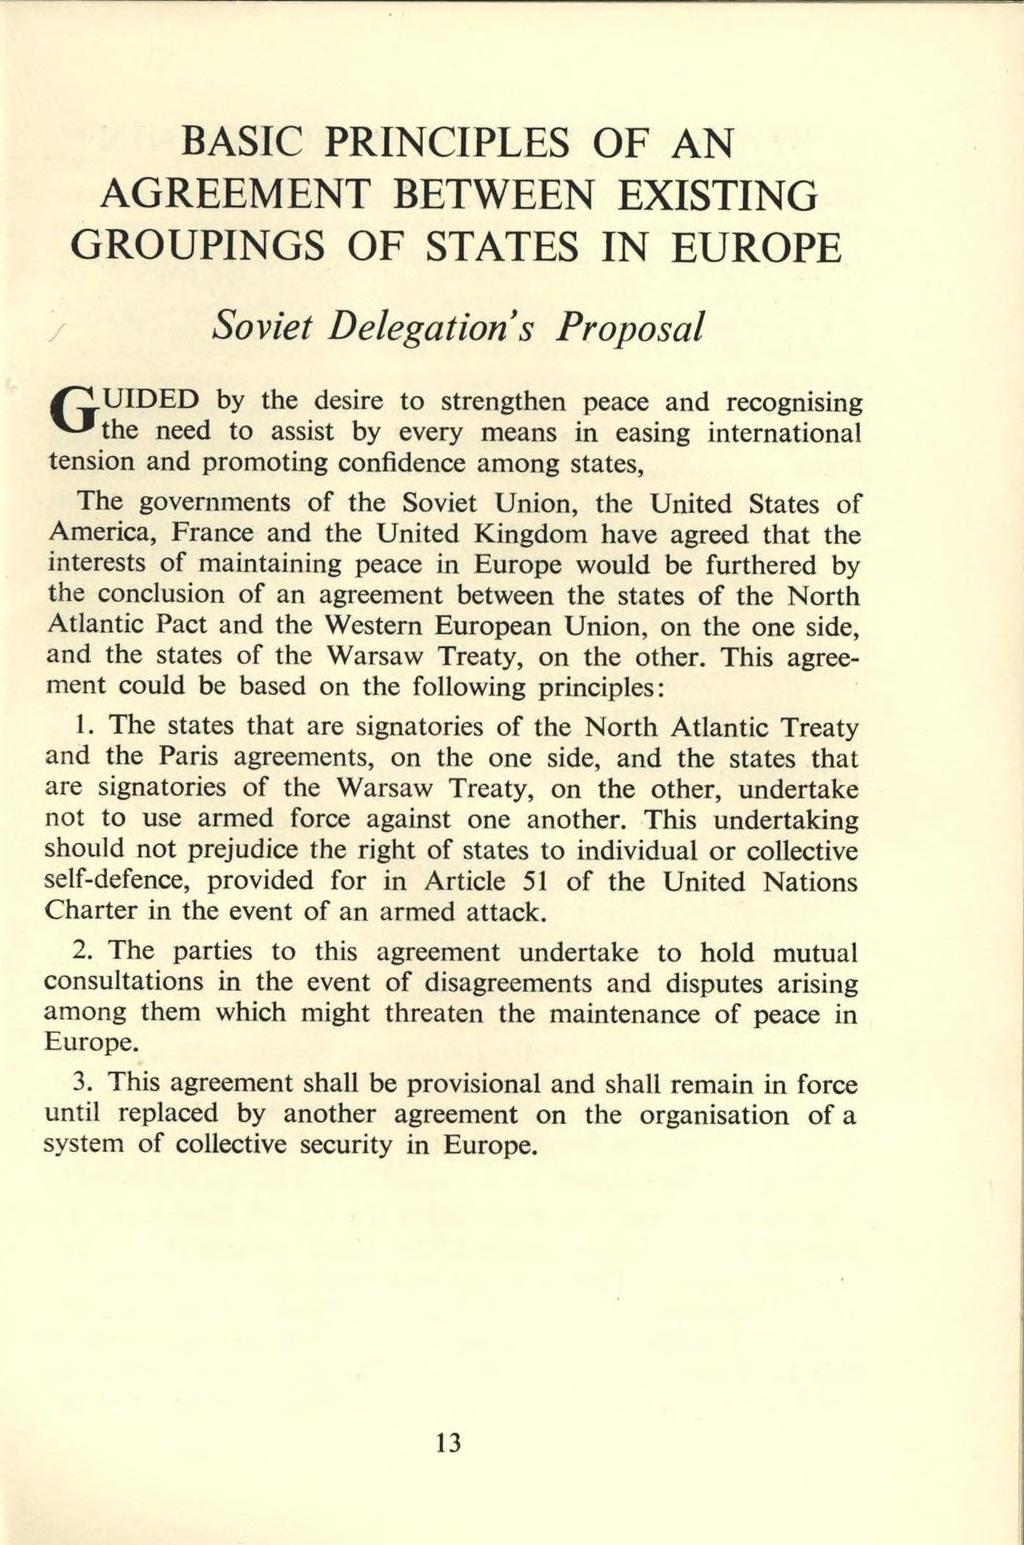 BASIC PRINCIPLES OF AN AGREEMENT BETWEEN EXISTING GROUPINGS OF STATES IN EUROPE Soviet Delegation s Proposal /~J.